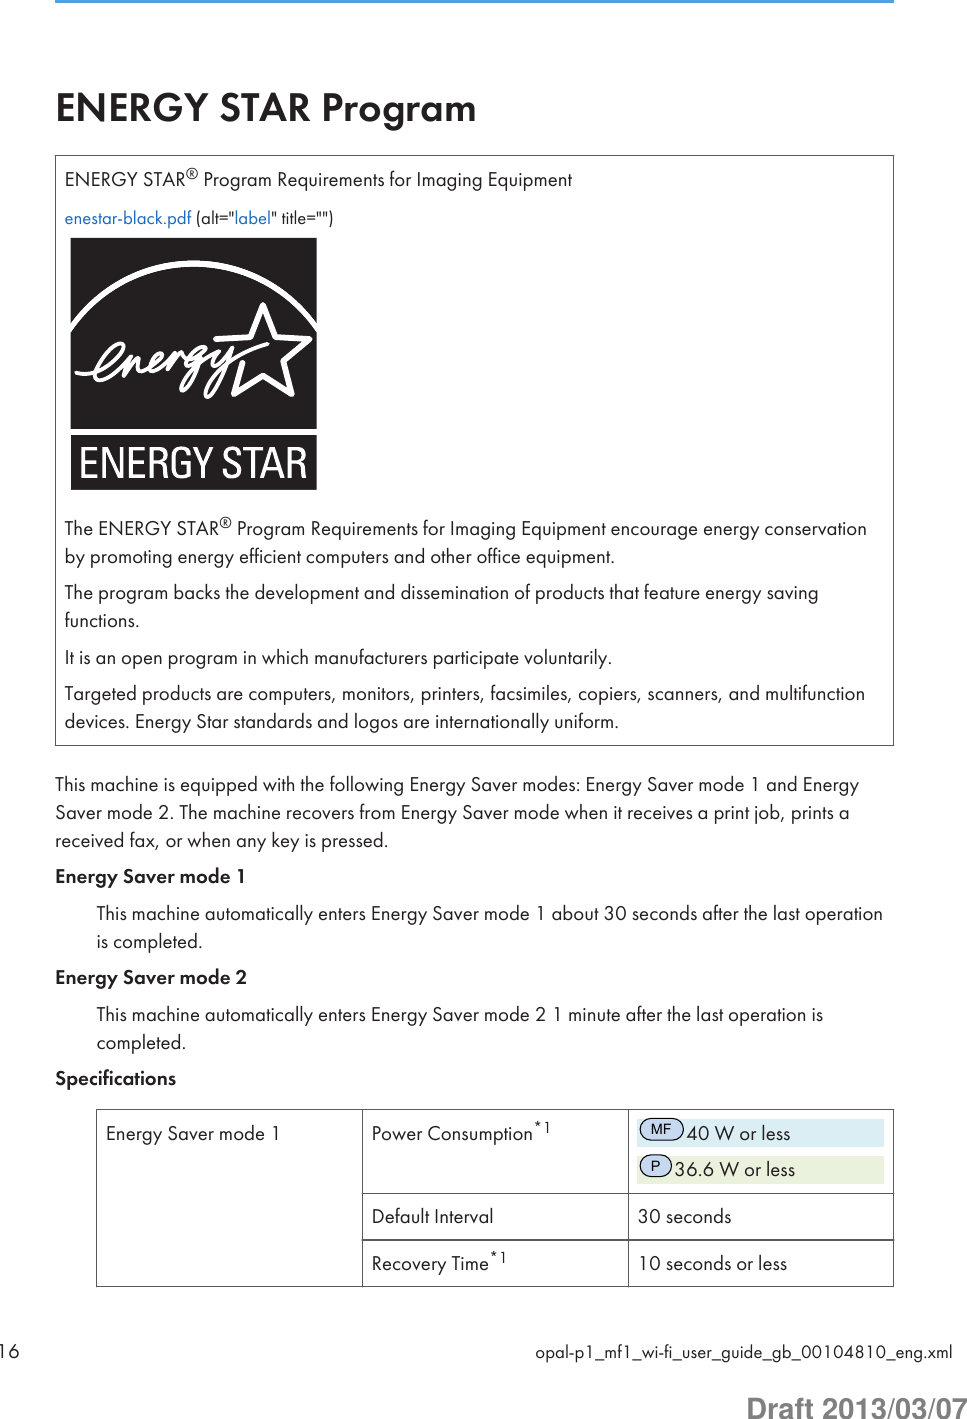 ENERGY STAR ProgramENERGY STAR® Program Requirements for Imaging Equipmentenestar-black.pdf (alt=&quot;label&quot; title=&quot;&quot;)The ENERGY STAR® Program Requirements for Imaging Equipment encourage energy conservationby promoting energy efficient computers and other office equipment.The program backs the development and dissemination of products that feature energy savingfunctions.It is an open program in which manufacturers participate voluntarily.Targeted products are computers, monitors, printers, facsimiles, copiers, scanners, and multifunctiondevices. Energy Star standards and logos are internationally uniform.This machine is equipped with the following Energy Saver modes: Energy Saver mode 1 and EnergySaver mode 2. The machine recovers from Energy Saver mode when it receives a print job, prints areceived fax, or when any key is pressed.Energy Saver mode 1This machine automatically enters Energy Saver mode 1 about 30 seconds after the last operationis completed.Energy Saver mode 2This machine automatically enters Energy Saver mode 2 1 minute after the last operation iscompleted.SpecificationsEnergy Saver mode 1 Power Consumption*1MF40 W or lessP36.6 W or lessDefault Interval 30 secondsRecovery Time*1 10 seconds or less16 opal-p1_mf1_wi-fi_user_guide_gb_00104810_eng.xmlDraft 2013/03/07